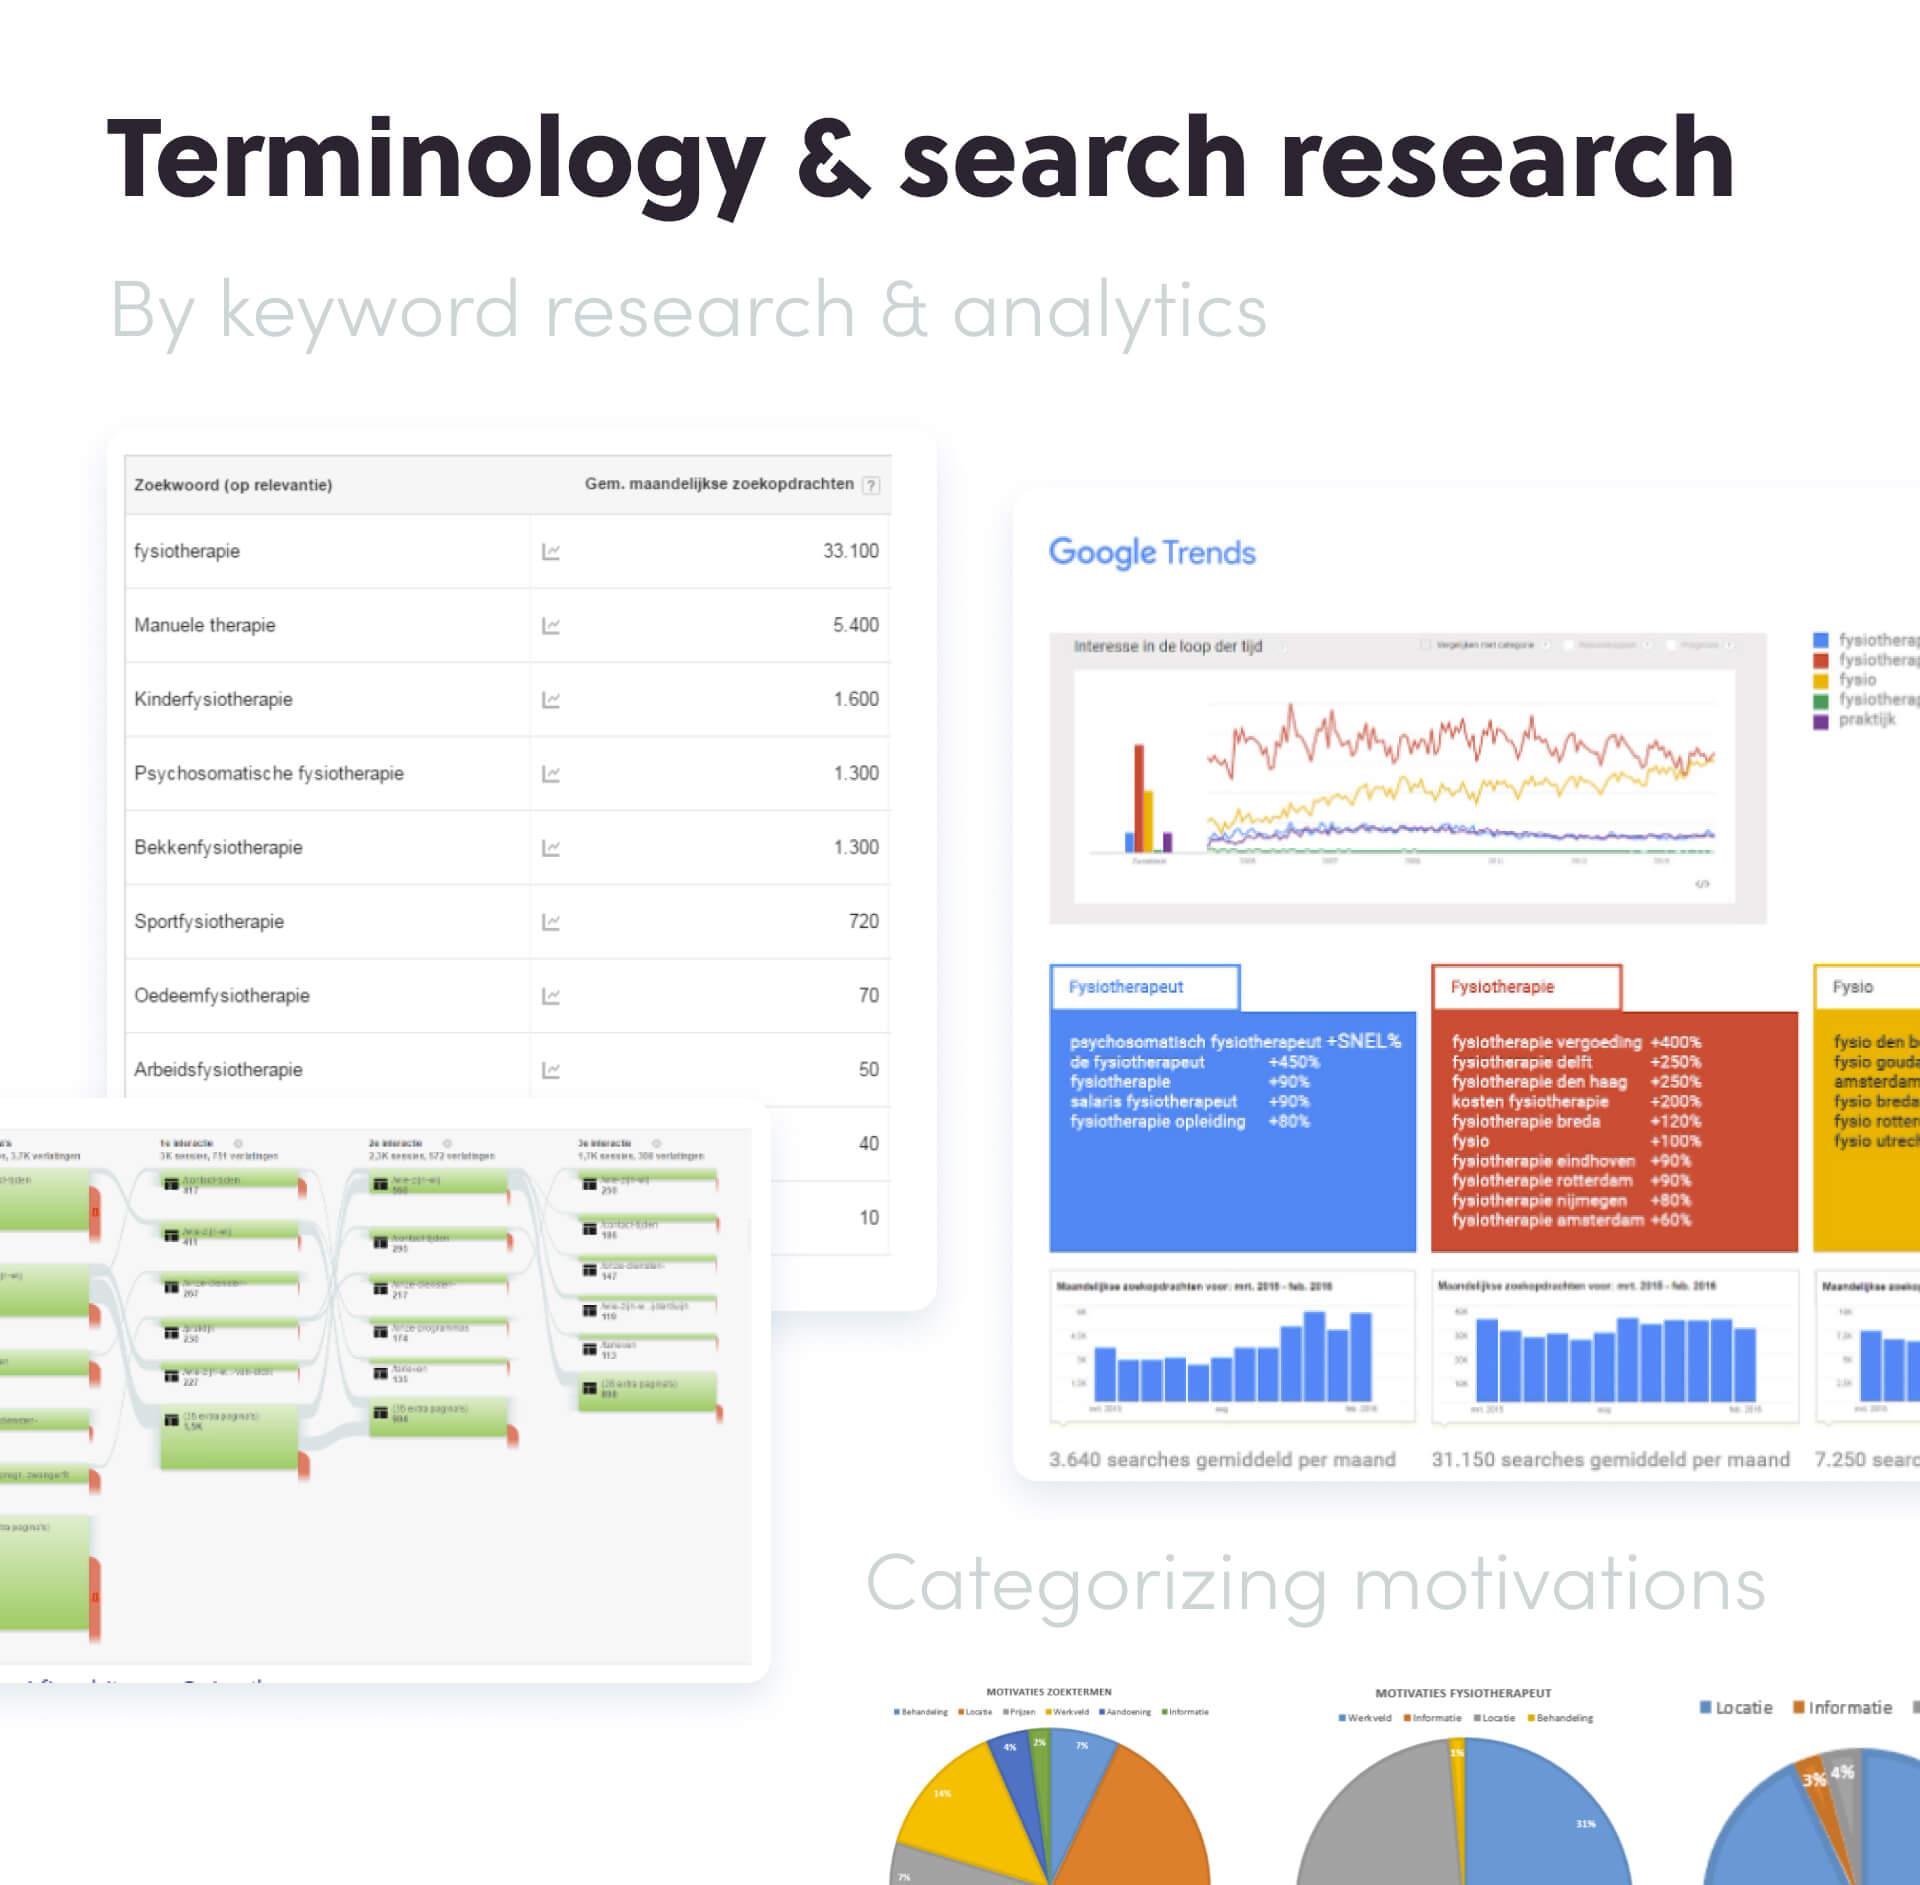 SEO optimized data analysis presentation slide showing keyword research, Google Trends graph, search volume statistics, and categorization of motivations pie chart.